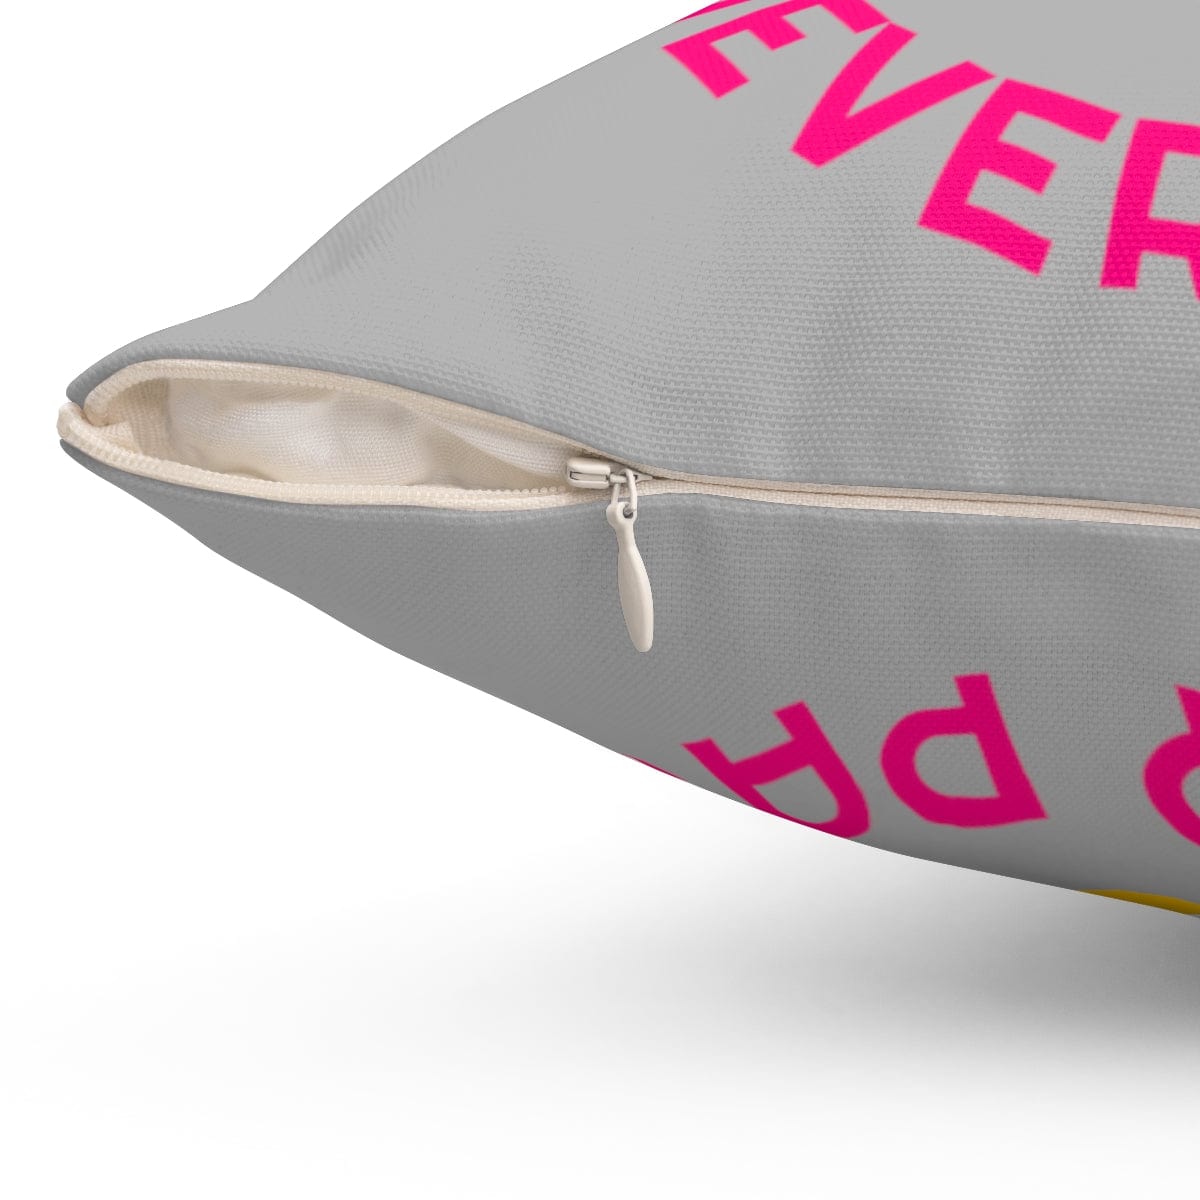 My Gamer Life Never Pauses | Spun Square Light Grey | Bed/Couch Pillow